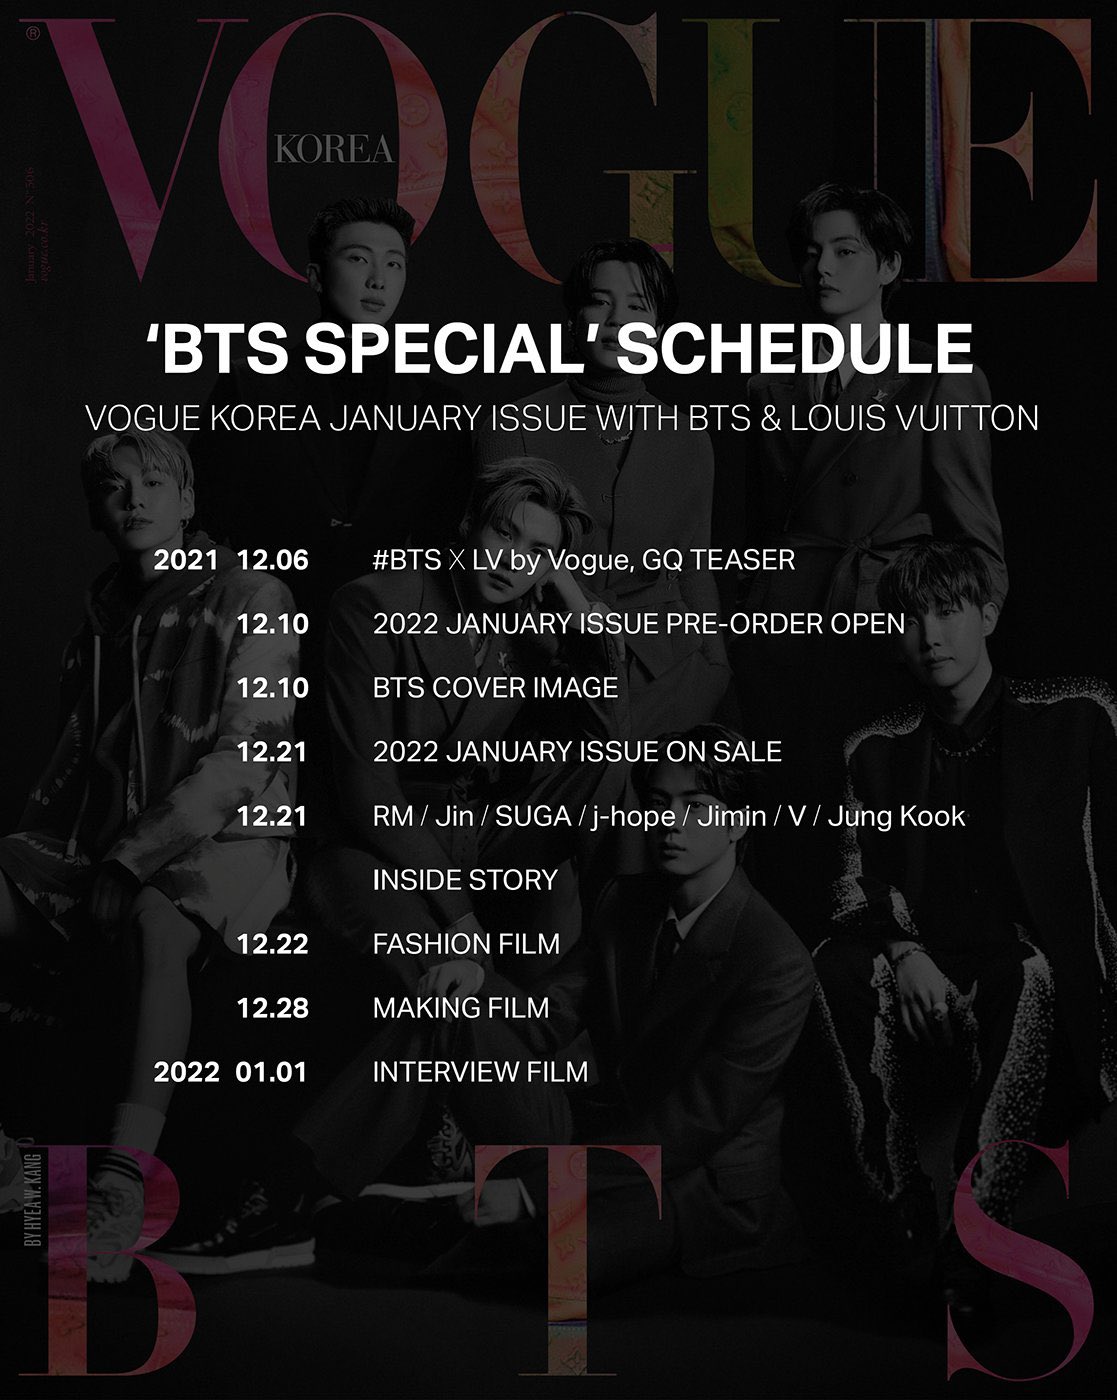 Stats for Bangtan⁷ (FAN ACCOUNT) on X: Vogue Korea and GQ Korea's  schedules for their collaboration with BTS x Louis Vuitton!   / X